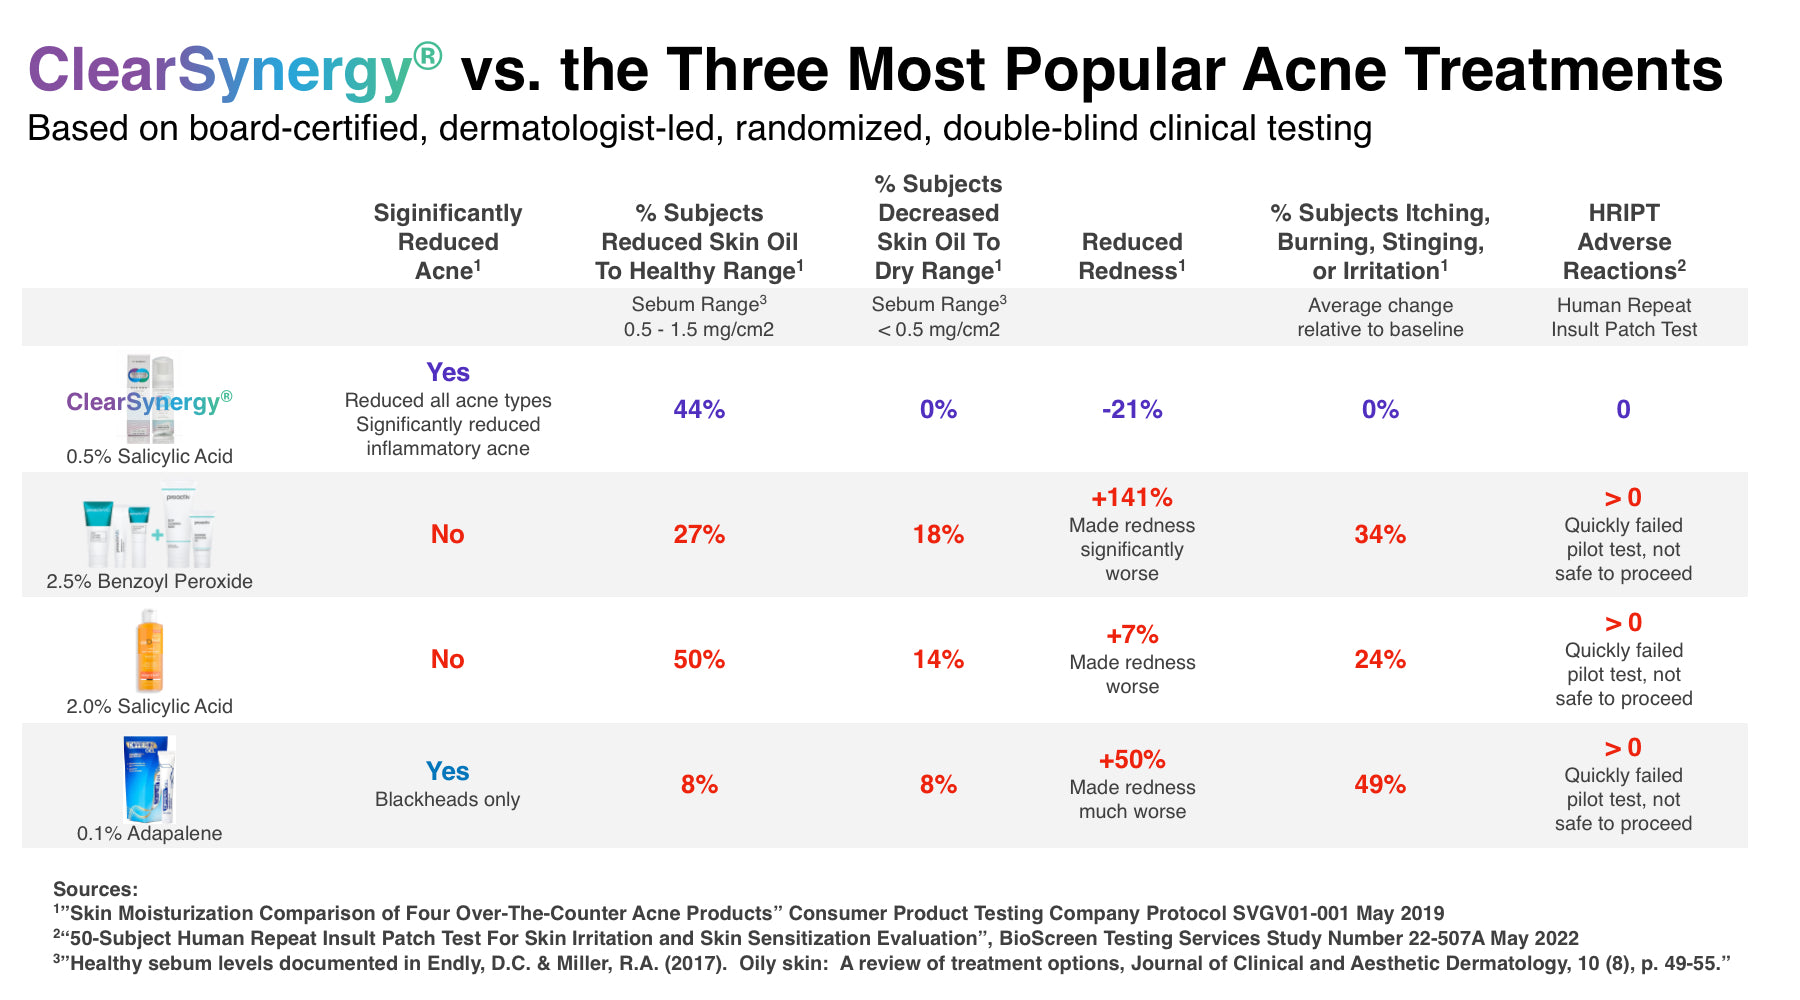 Detailed test results comparing ClearSynergy to the three most popular acne treatments